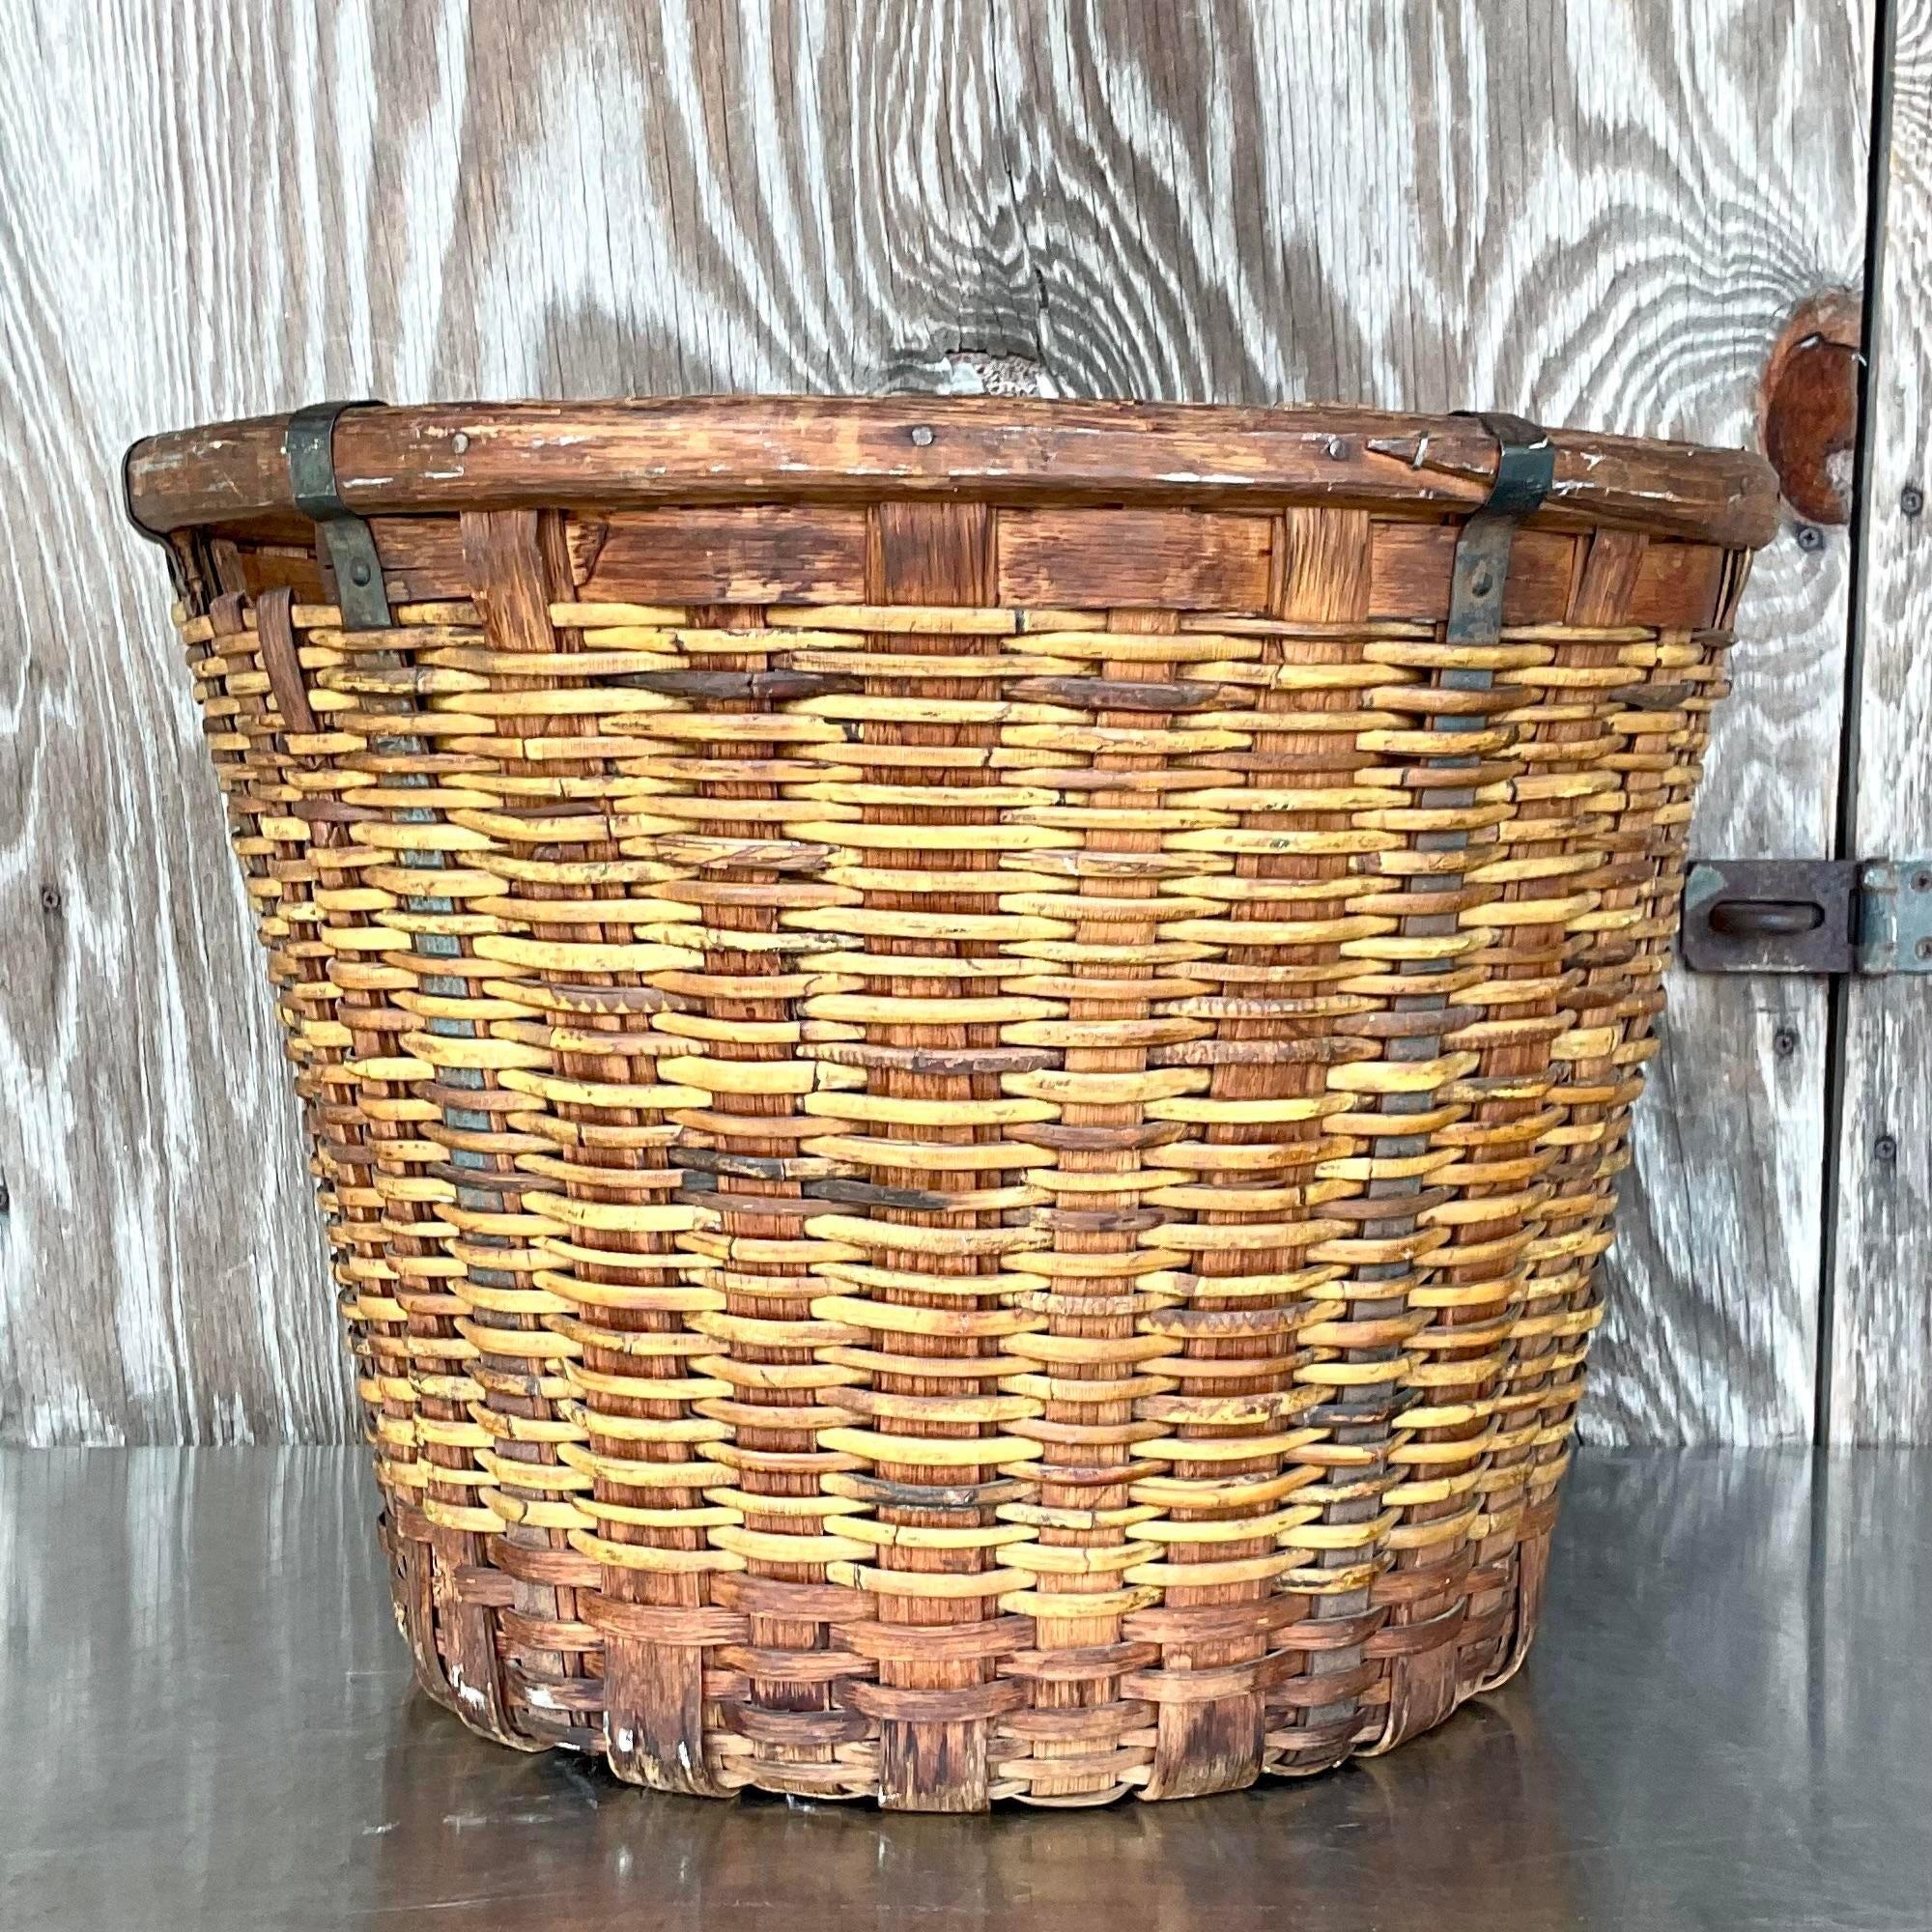 A fantastic vintage Boho basket. A chic French design with metal ribs and woven rattan. An absolutely stunning basket. Acquired from a Palm Beach estate.